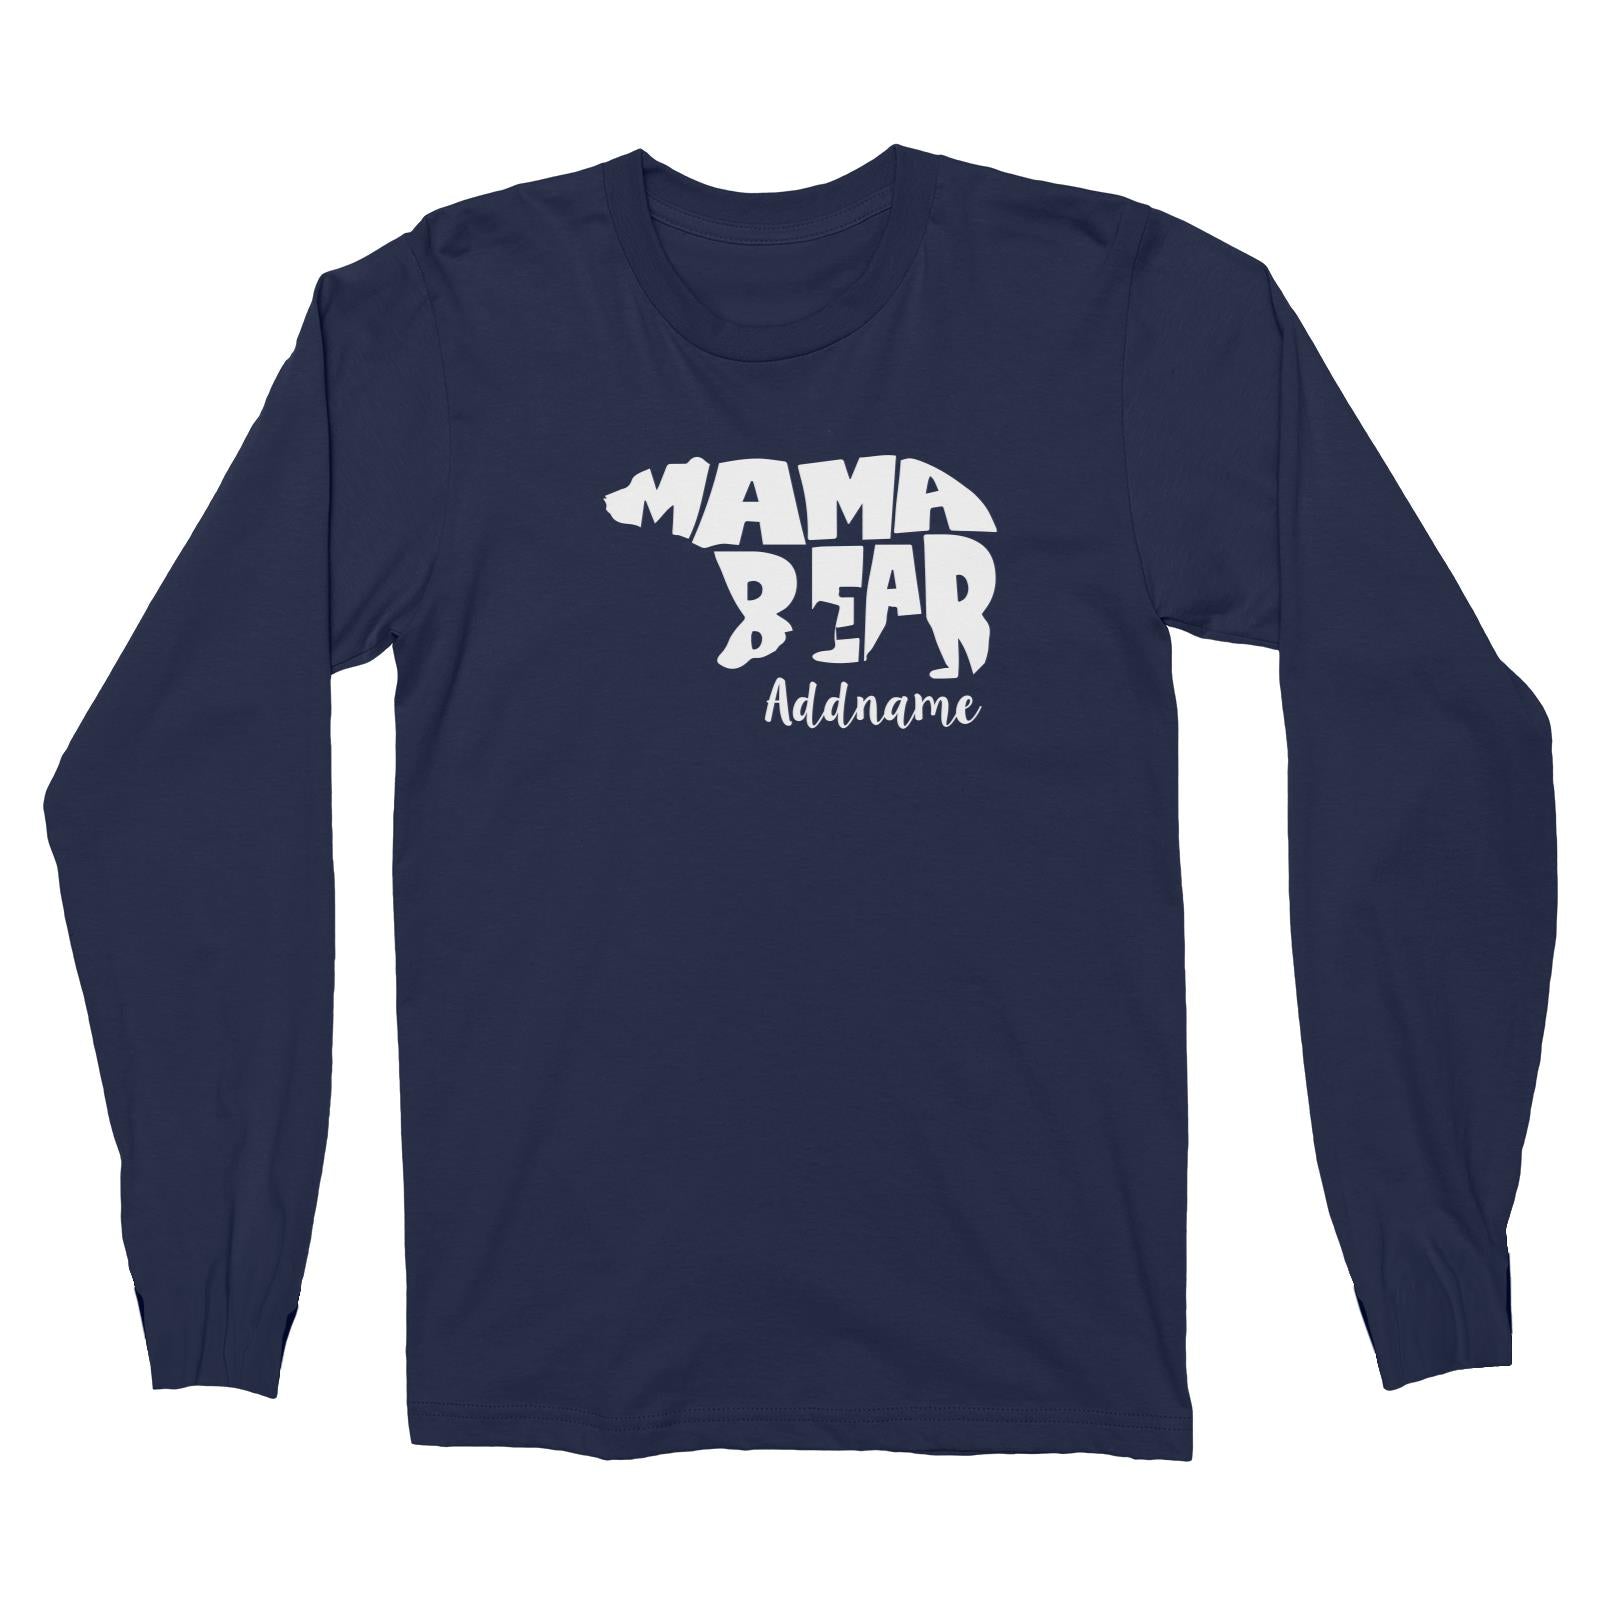 Mama Bear Silhoutte Addname Long Sleeve Unisex T-Shirt  Matching Family Personalizable Designs